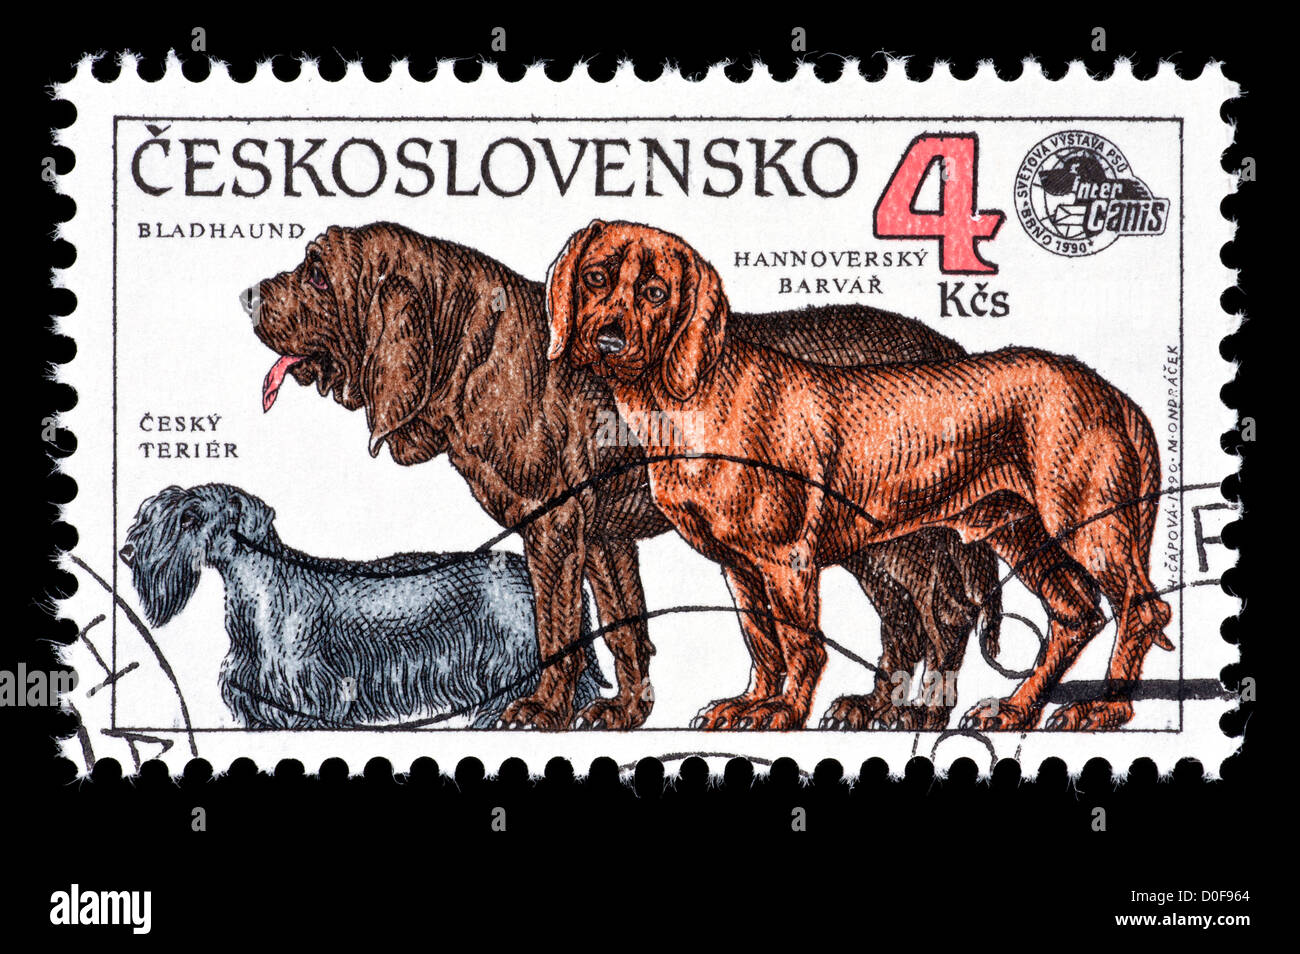 Postage stamp from Czechoslovakia depicting various dogs. Stock Photo